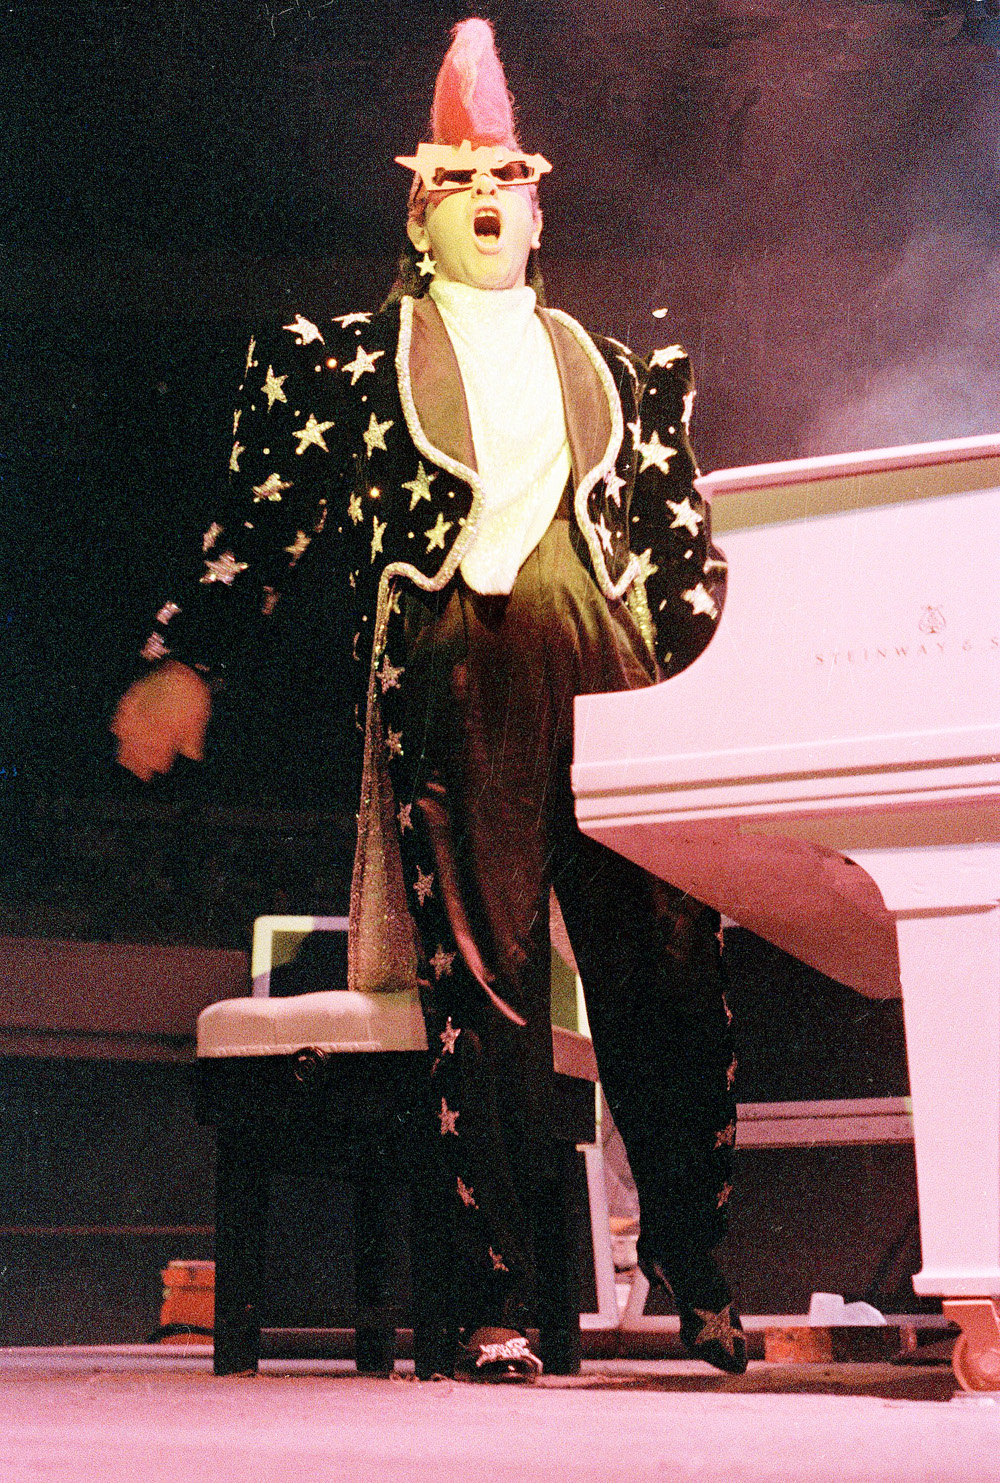 The Best Elton John Outfits: See The Singer's Wildest Looks